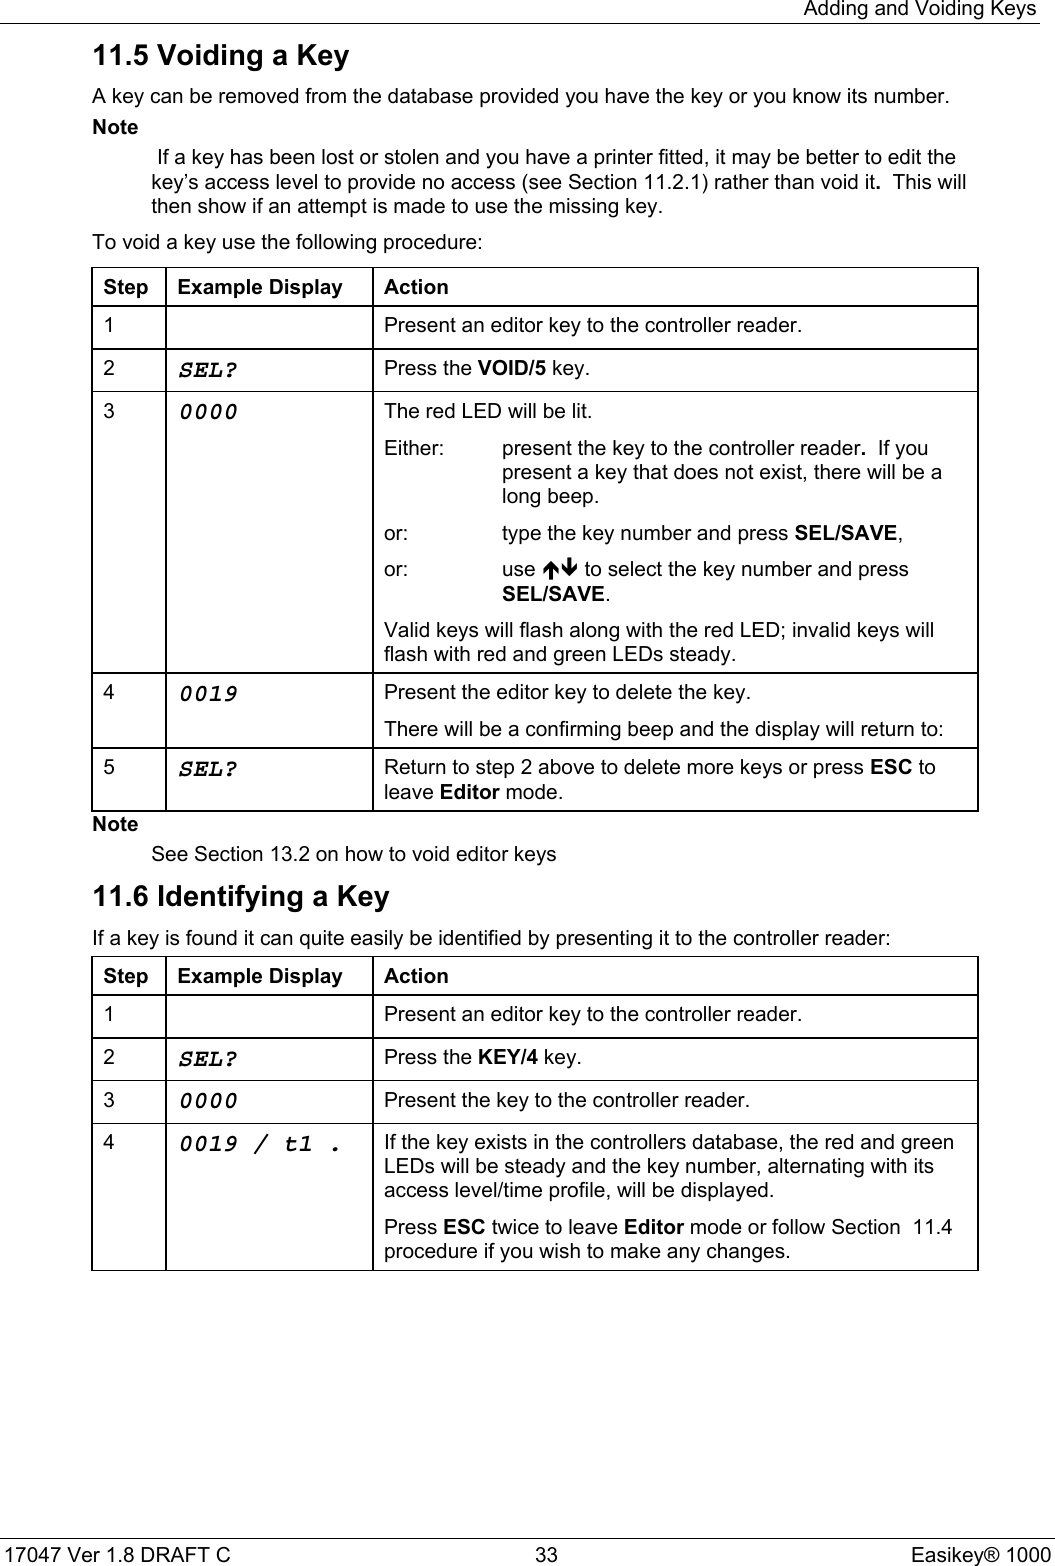 Adding and Voiding Keys17047 Ver 1.8 DRAFT C  33 Easikey® 100011.5 Voiding a KeyA key can be removed from the database provided you have the key or you know its number.Note If a key has been lost or stolen and you have a printer fitted, it may be better to edit thekey’s access level to provide no access (see Section 11.2.1) rather than void it.  This willthen show if an attempt is made to use the missing key.To void a key use the following procedure:Step Example Display Action1 Present an editor key to the controller reader.2SEL? Press the VOID/5 key.30000 The red LED will be lit.Either: present the key to the controller reader.  If youpresent a key that does not exist, there will be along beep.or: type the key number and press SEL/SAVE,or: use ÏÐ to select the key number and pressSEL/SAVE.Valid keys will flash along with the red LED; invalid keys willflash with red and green LEDs steady.40019 Present the editor key to delete the key.There will be a confirming beep and the display will return to:5SEL? Return to step 2 above to delete more keys or press ESC toleave Editor mode.NoteSee Section 13.2 on how to void editor keys11.6 Identifying a KeyIf a key is found it can quite easily be identified by presenting it to the controller reader:Step Example Display Action1 Present an editor key to the controller reader.2SEL? Press the KEY/4 key.30000 Present the key to the controller reader.40019/t1. If the key exists in the controllers database, the red and greenLEDs will be steady and the key number, alternating with itsaccess level/time profile, will be displayed.Press ESC twice to leave Editor mode or follow Section  11.4procedure if you wish to make any changes.